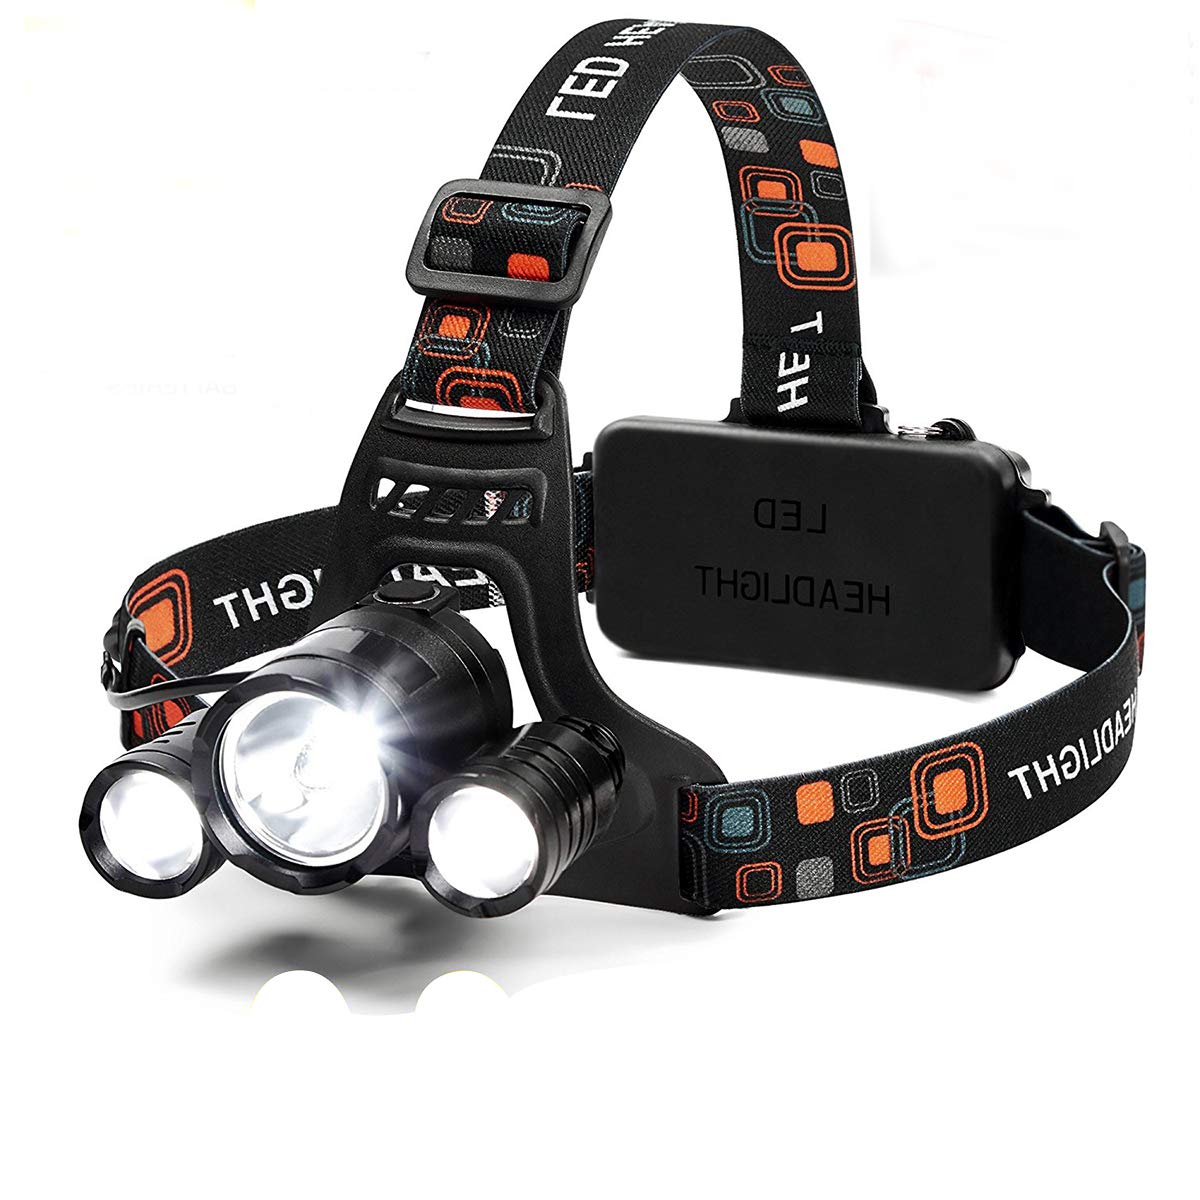 GLiving Headlamp, Brightest High 6000 Lumen LED Work Headlight, USB Rechargeable  Waterproof Flashlight with Zoomable Work Light,Head Lights camping head  lamps